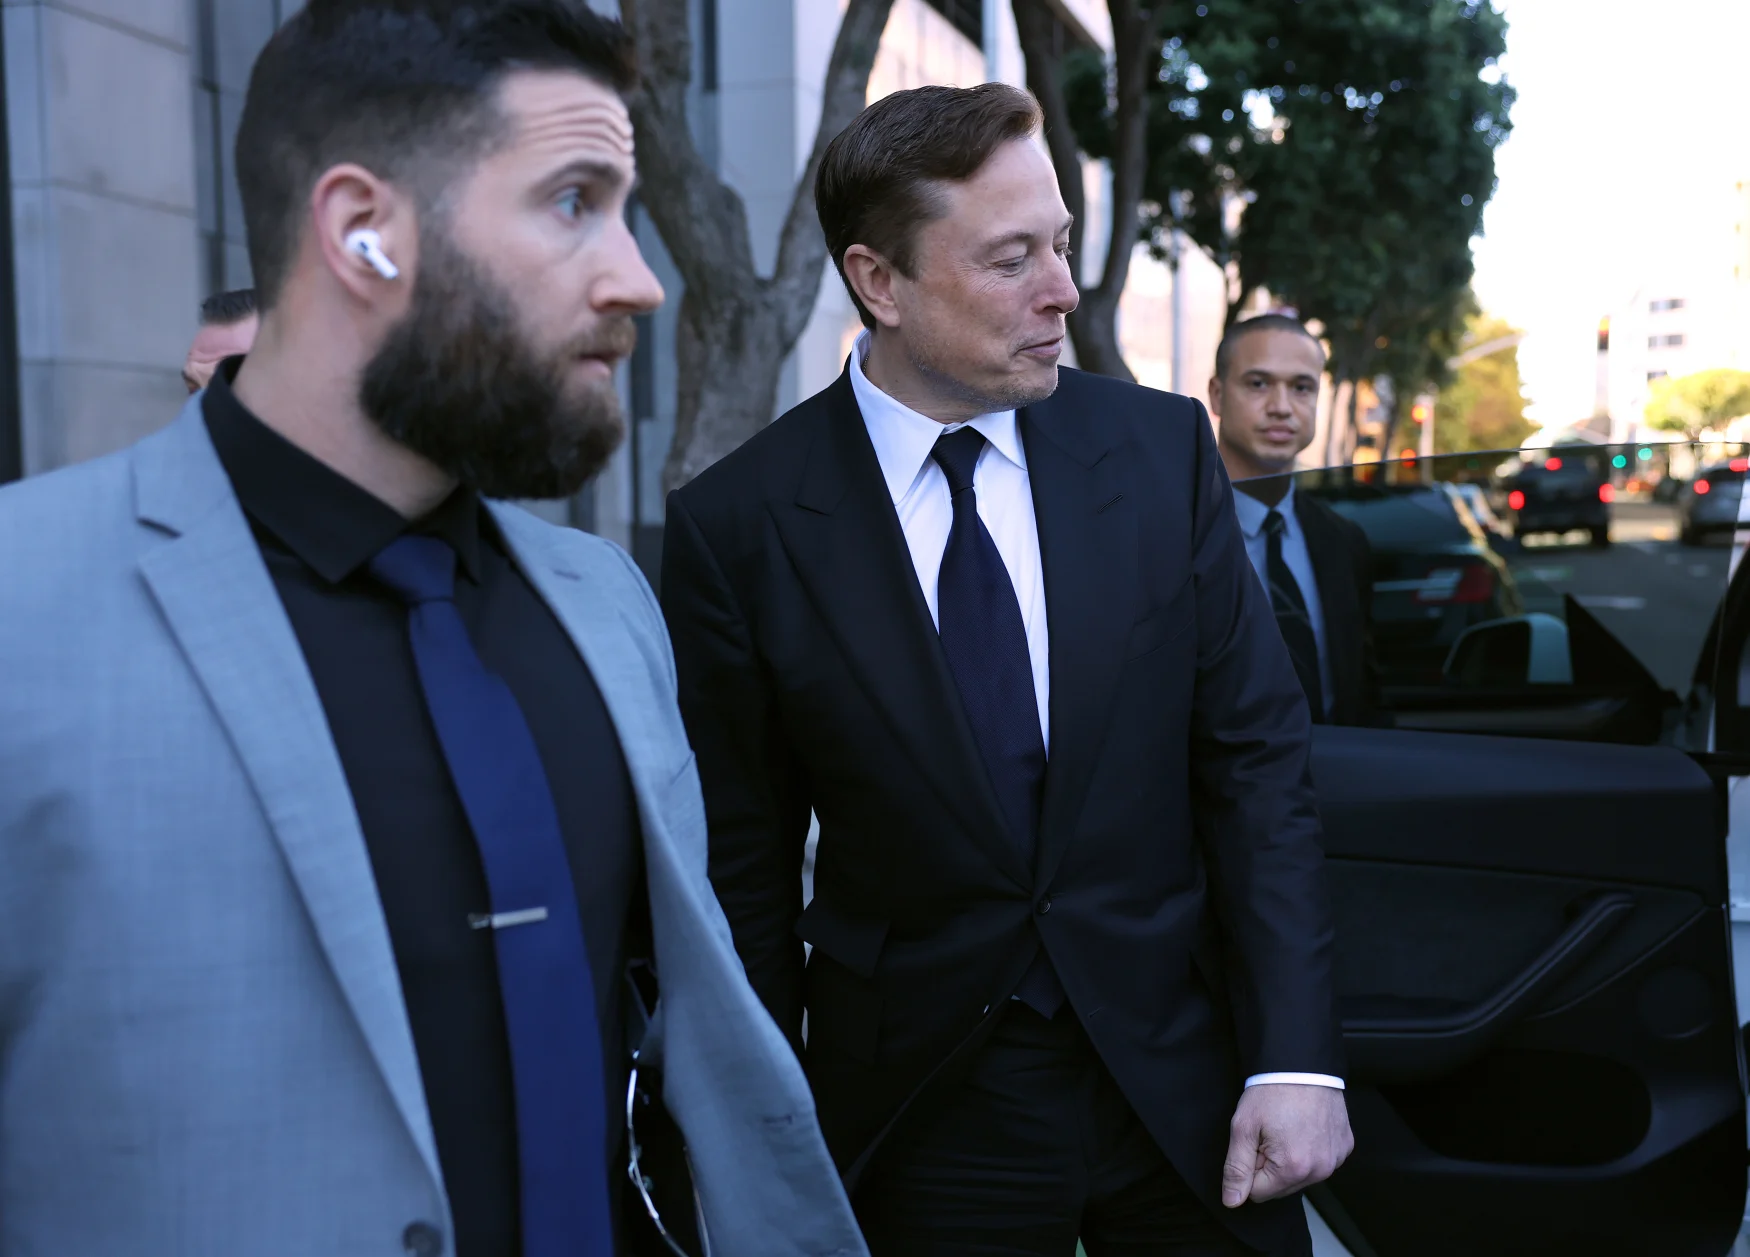 SAN FRANCISCO, CALIFORNIA - JANUARY 24: Tesla CEO Elon Musk leaves the Phillip Burton Federal Building on January 24, 2023 in San Francisco, California.  Musk testified in court in a lawsuit filed by investors against Tesla and Musk over tweets he wrote in August 2018, saying he took Tesla private with the funding he provided.  The tweet turned out to be false and Tesla's stock price began to fluctuate wildly based on the tweet, costing shareholders billions of dollars.  (Photo by Justin Sullivan/Getty Images)